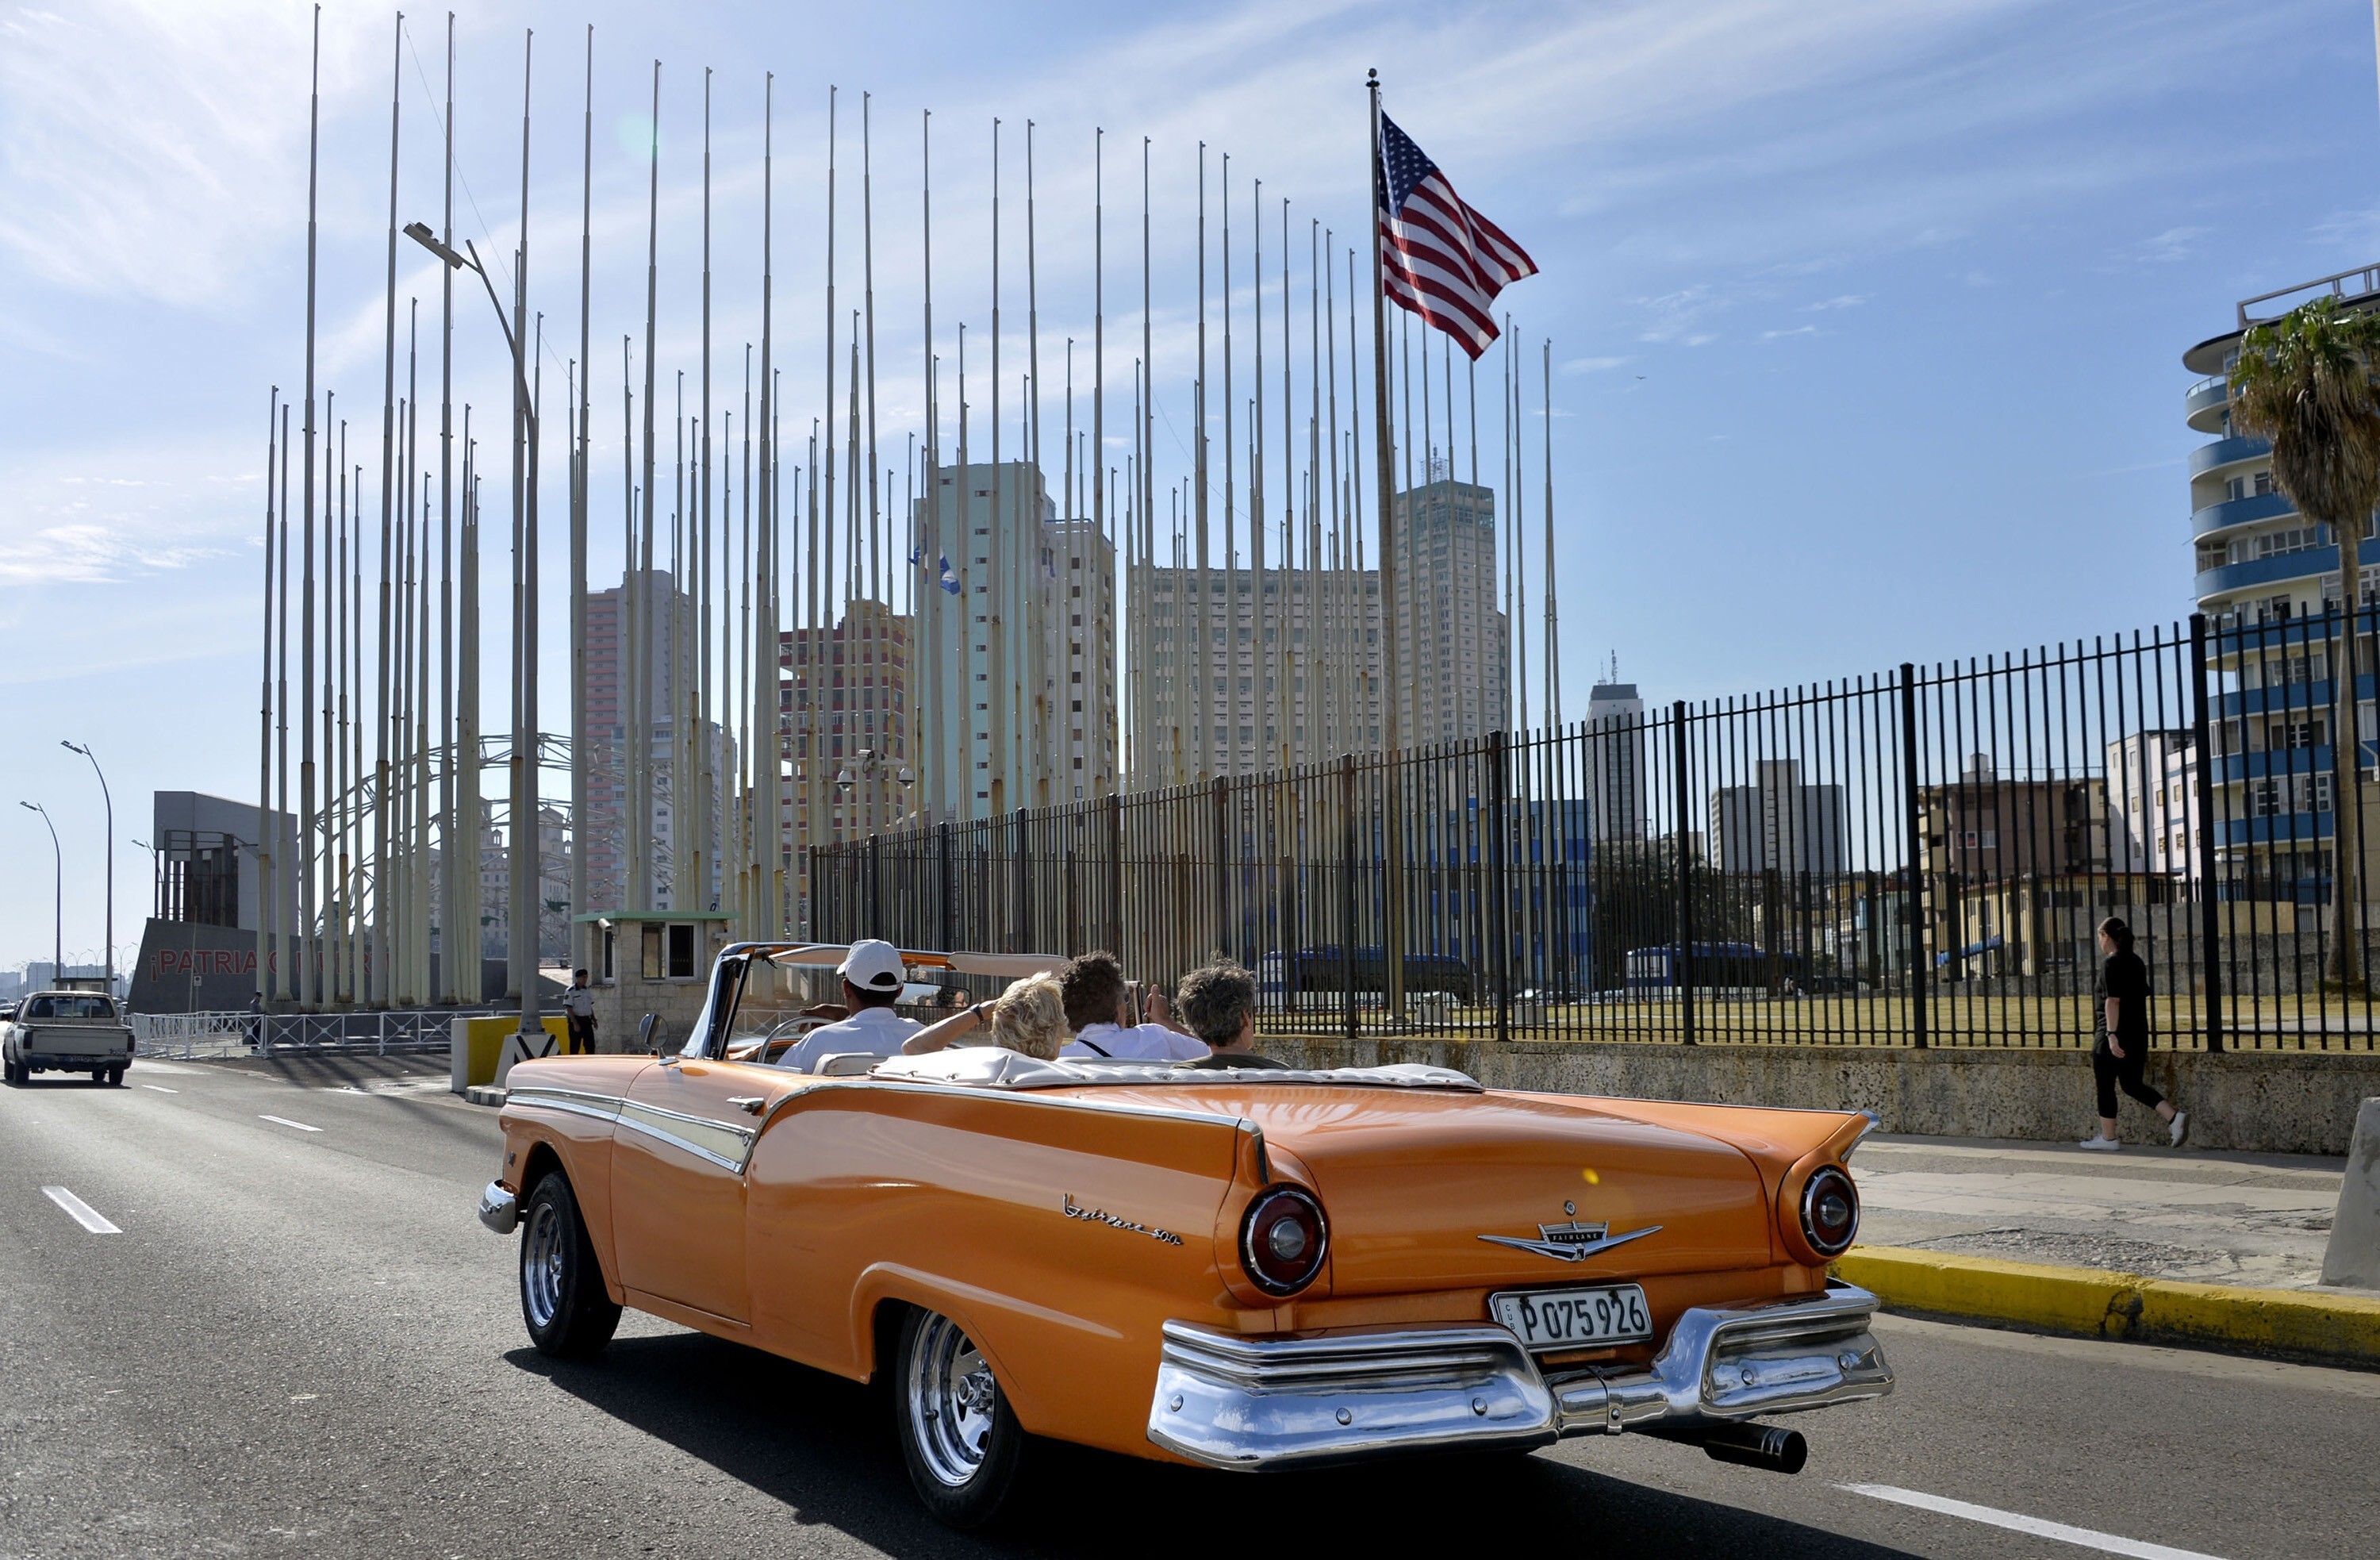 The illness first afflicted staff at the US embassy in Havana in 2016. Photo: TNS